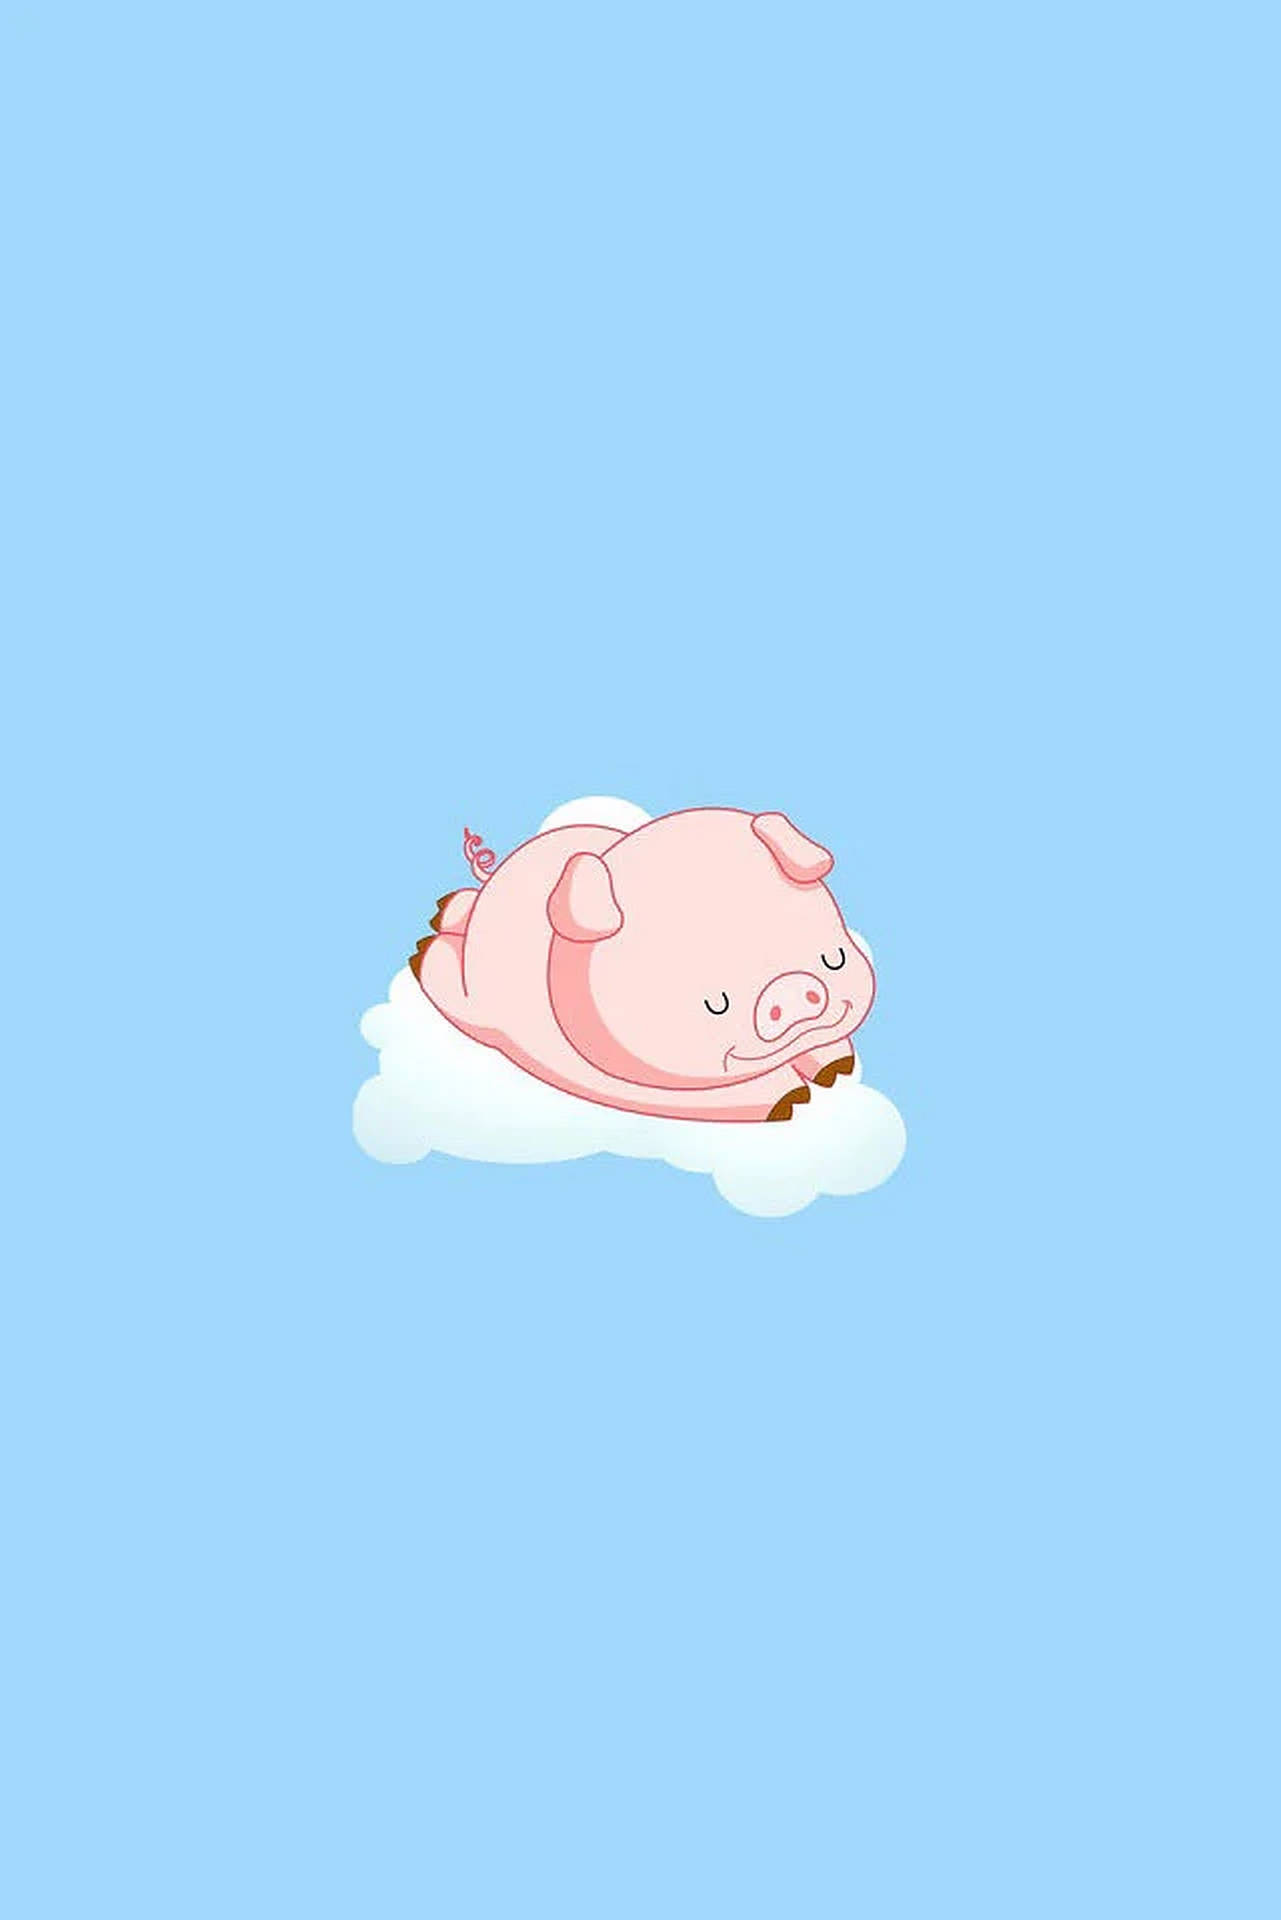 Cute Pig On Cloud Background